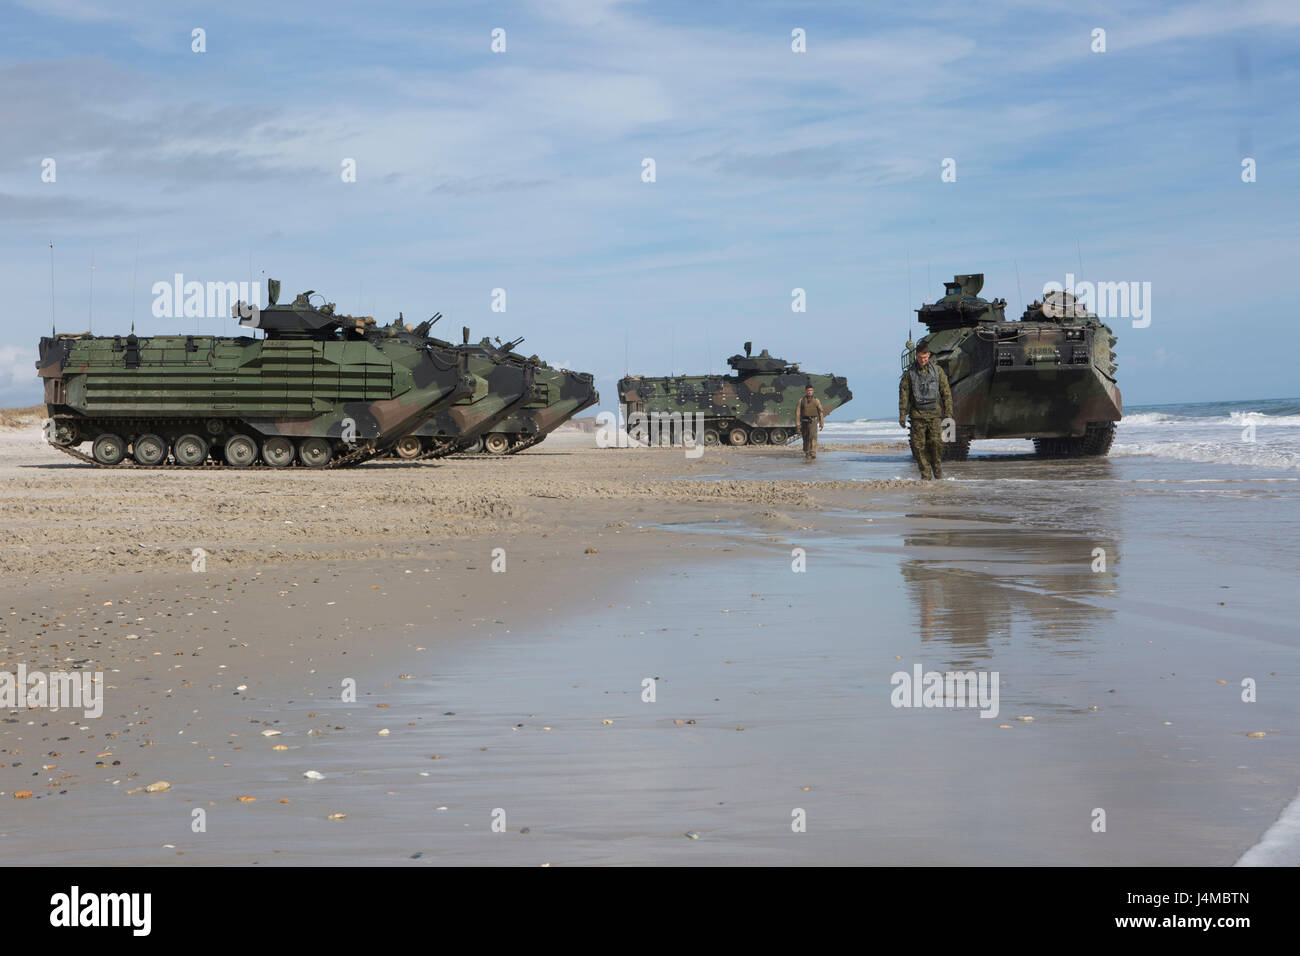 U.S. Marines with 2nd Platoon, Alpha Company, 2nd Assault Amphibian Battalion, 2nd Marine Division (2d MARDIV), ground-guide AAV-P7/A1 assault amphibious vehicles at Onslow Beach, Camp Lejeune, N.C., Feb. 22, 2017. Marines conducted amphibious assaults to enhance and maintain proficiency on ship to shore movement. (U.S. Marine Corps photo by Lance Cpl. Alexis C. Schneider) Stock Photo